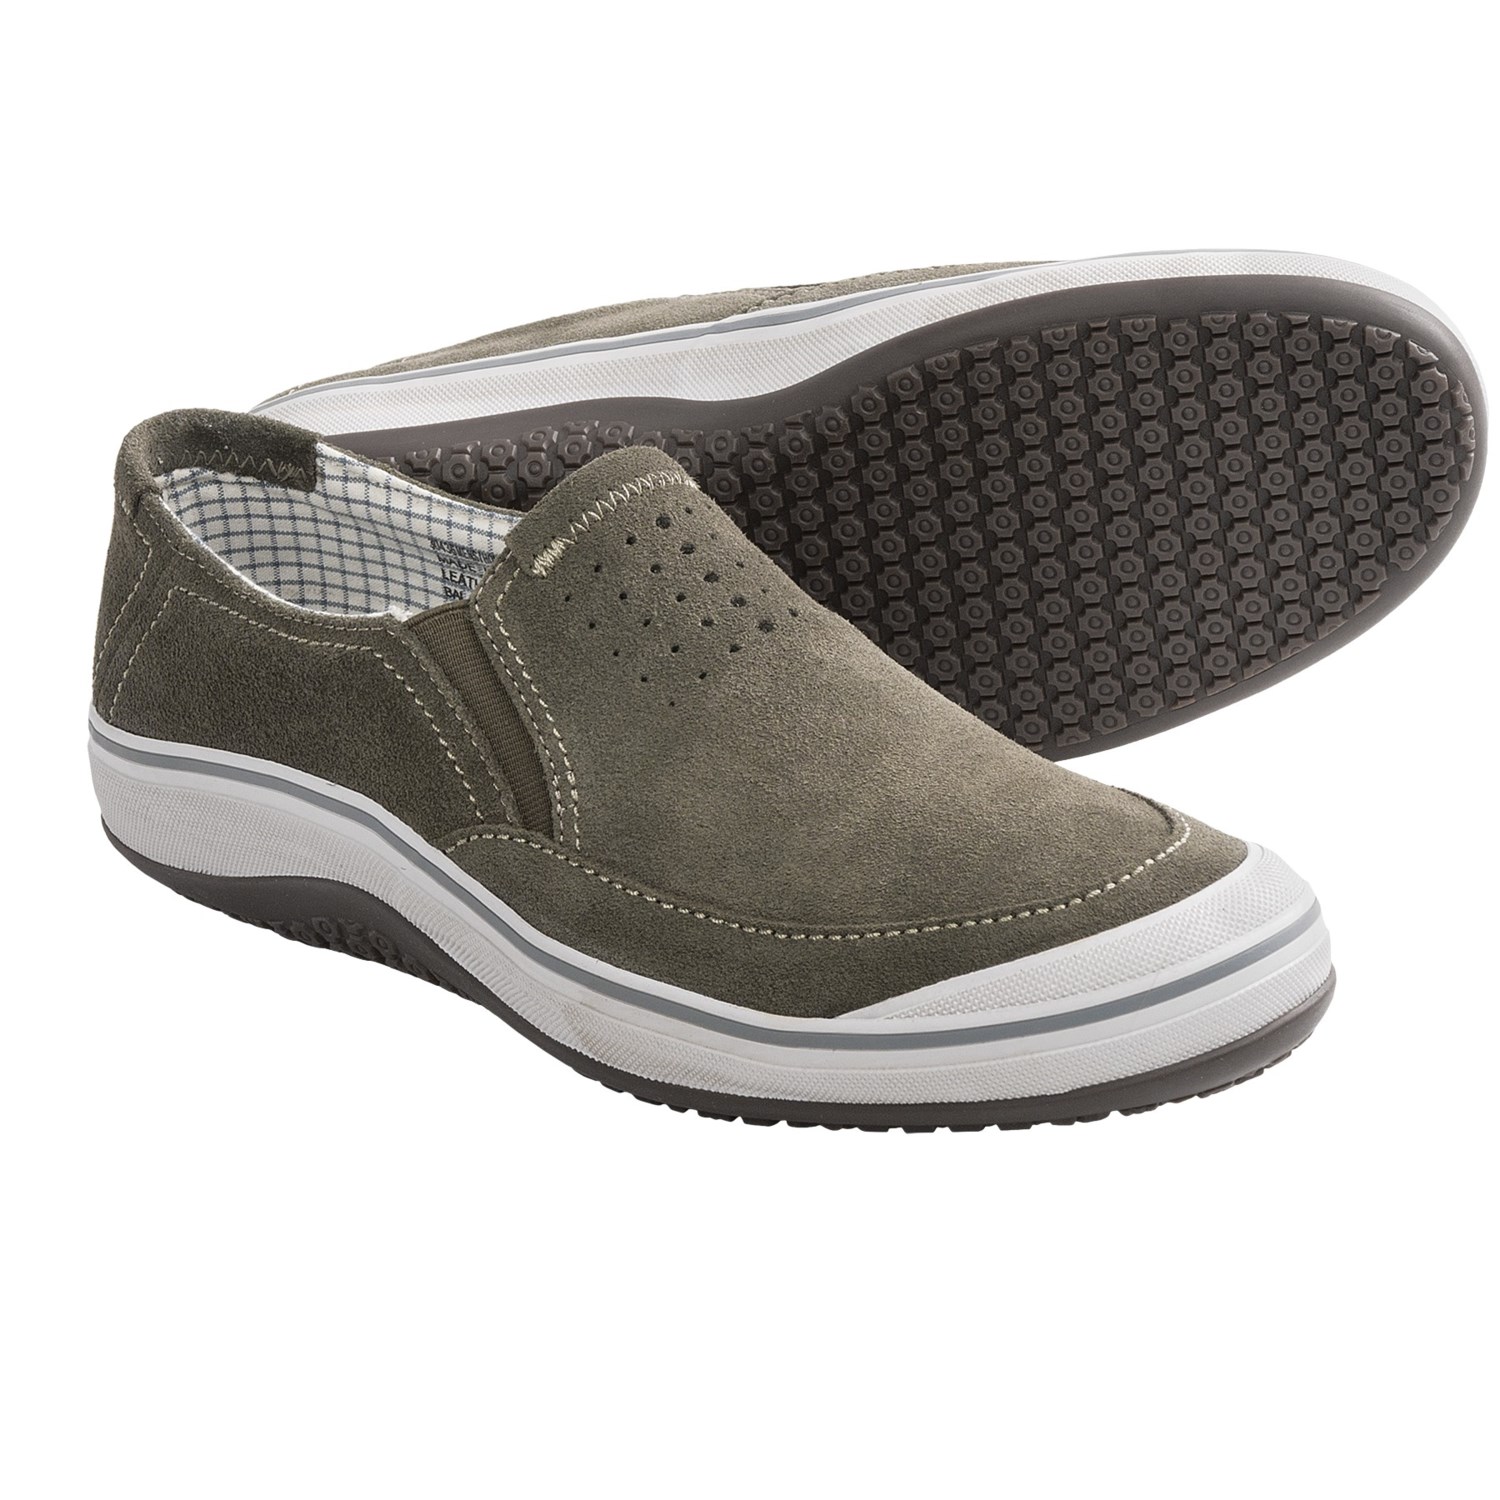 Clarks Bloodhound Shoes (For Men) 6102F - Save 33%